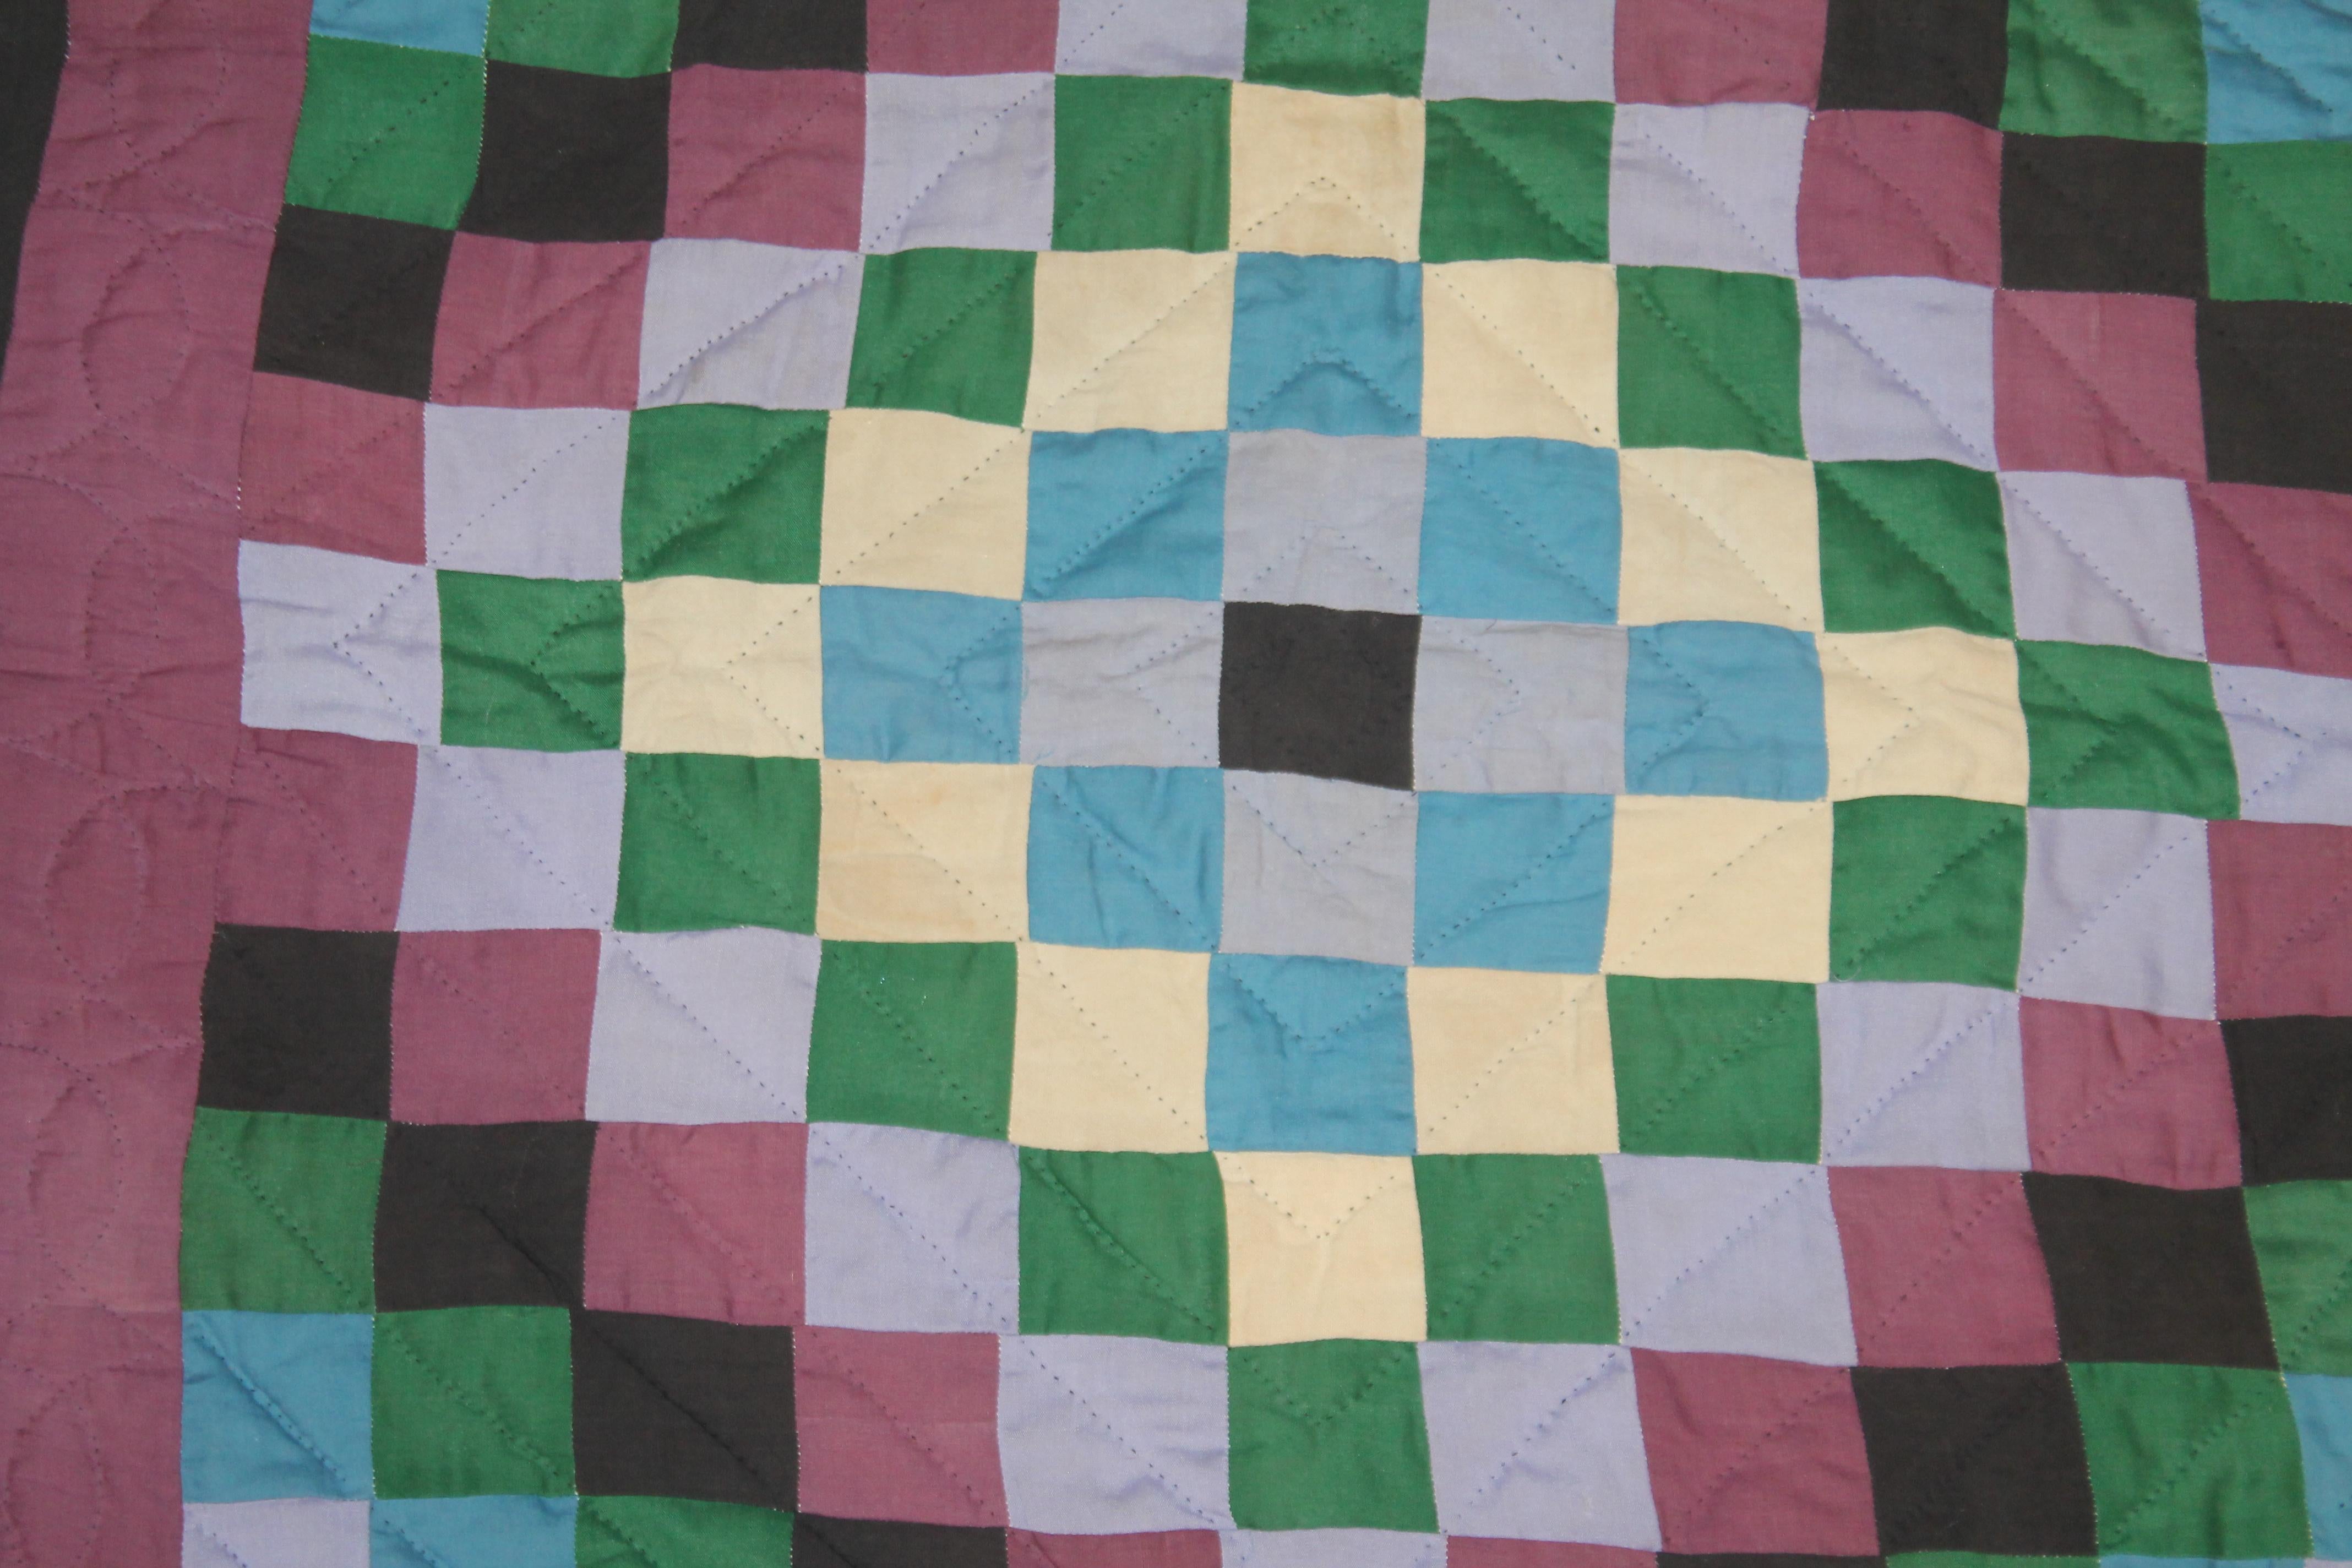 This Amish sunshine and shadow crib quilt is in good condition. It was found in Western Pennsylvania.